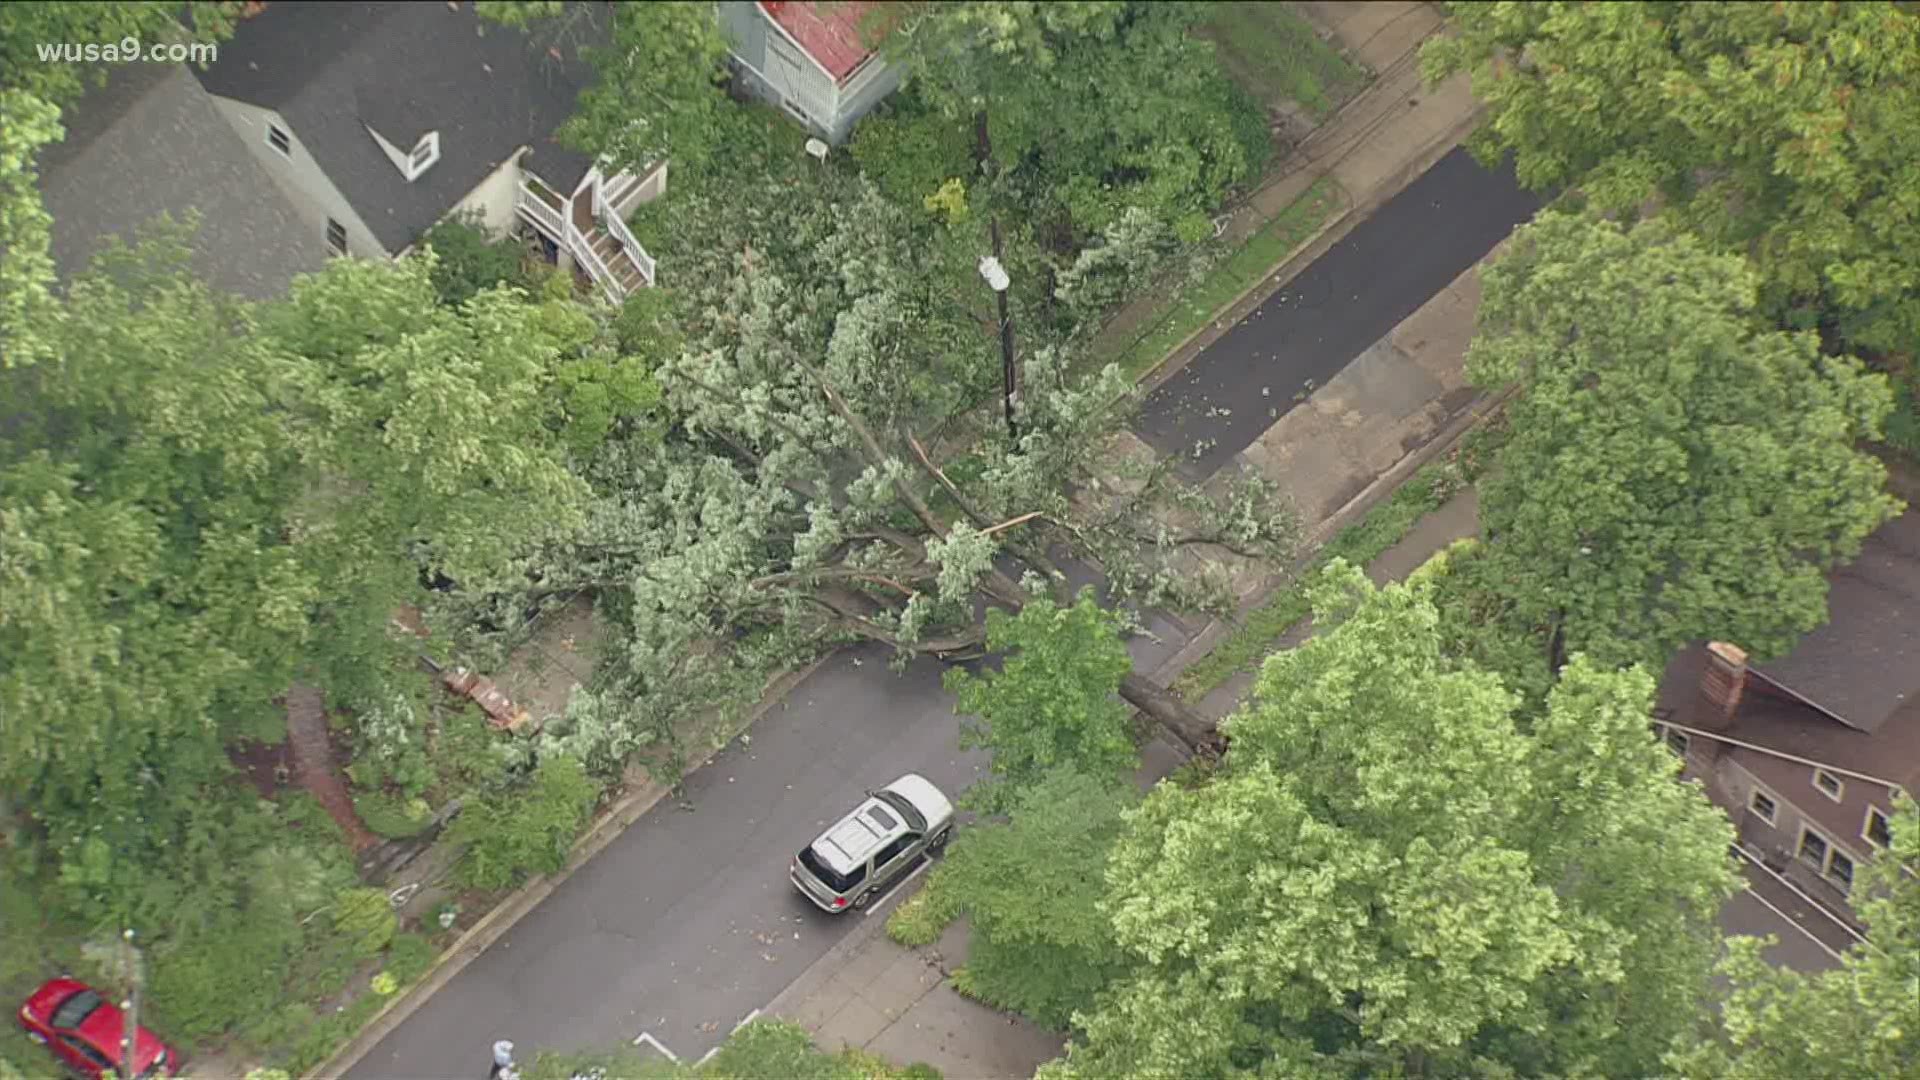 Thursday morning, a large tree came down and power lines are down causing a house fire in the area of Sherman Avenue and Maple Avenue in Takoma Park.